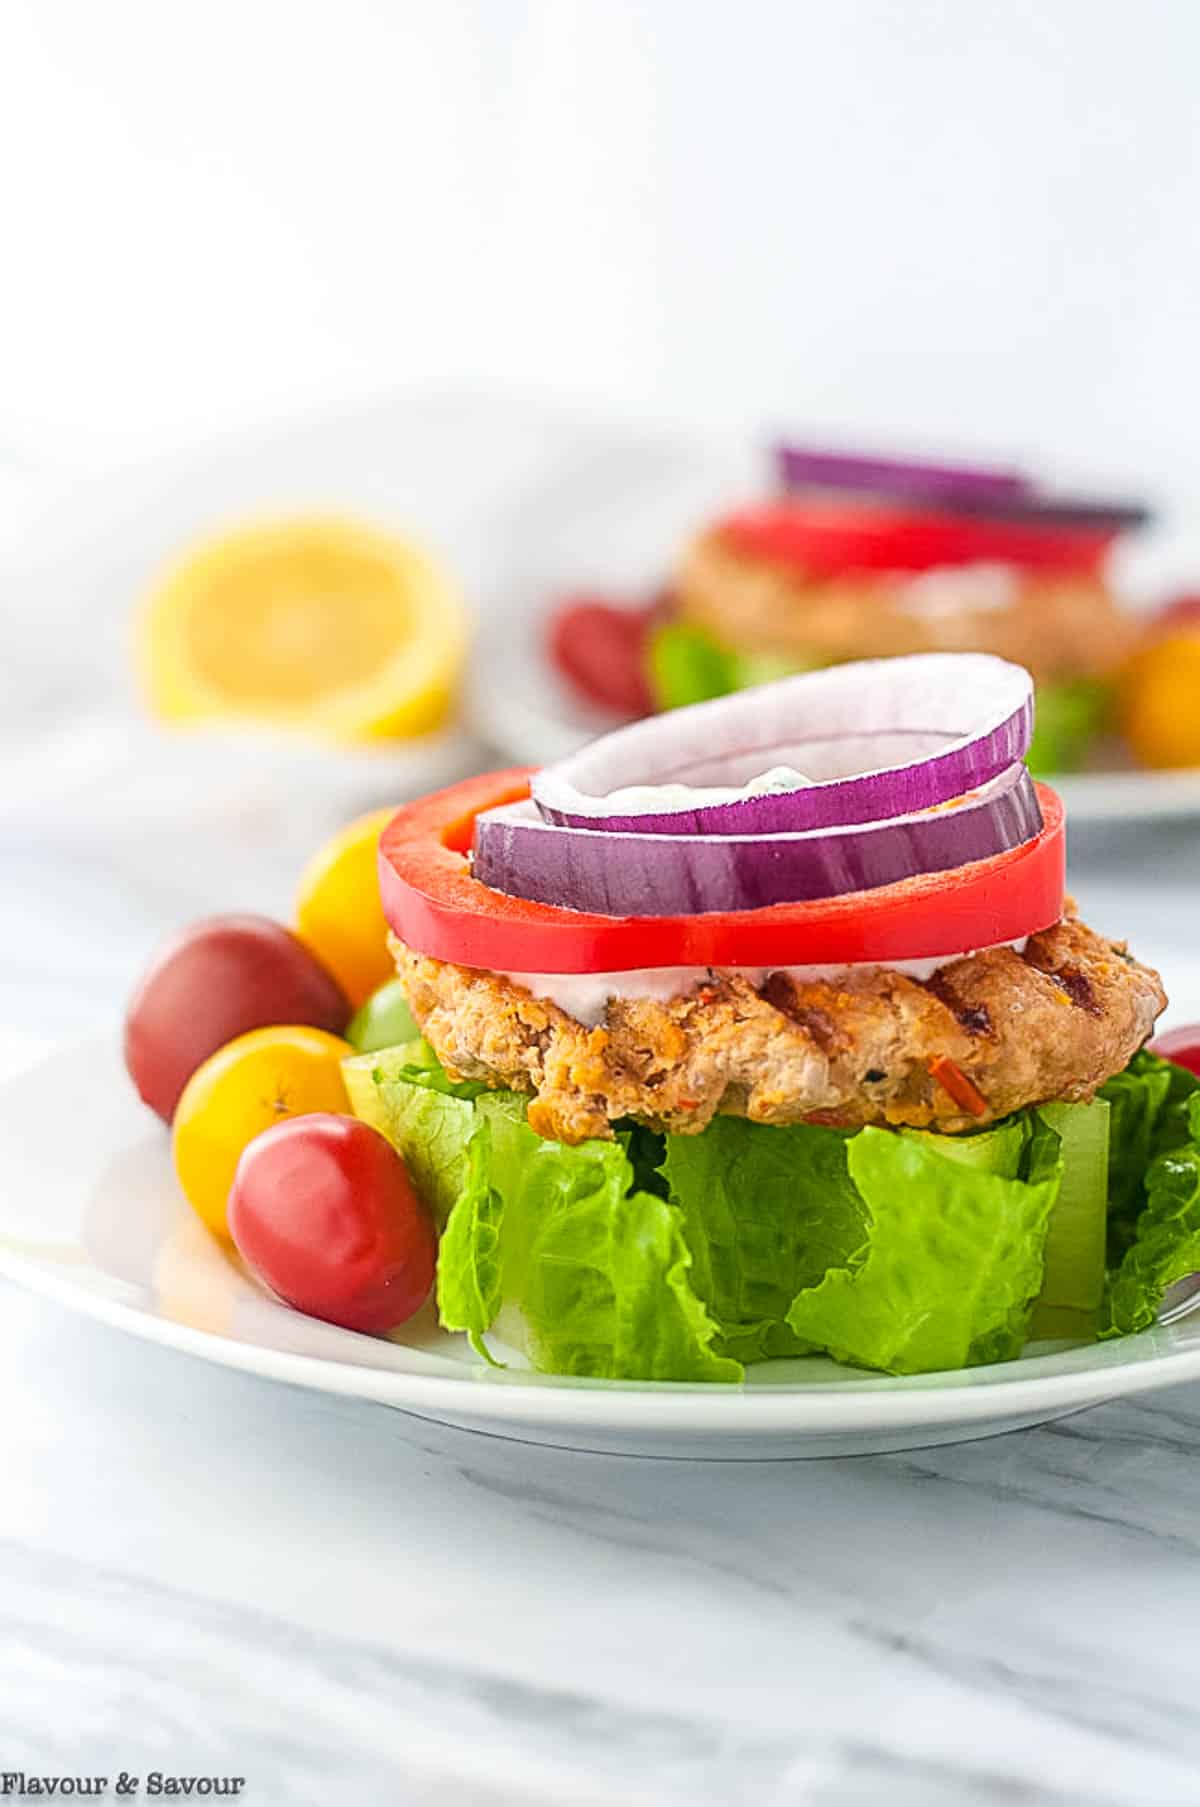 Moroccan-style open-face harissa chicken burger on a bed of lettuce.